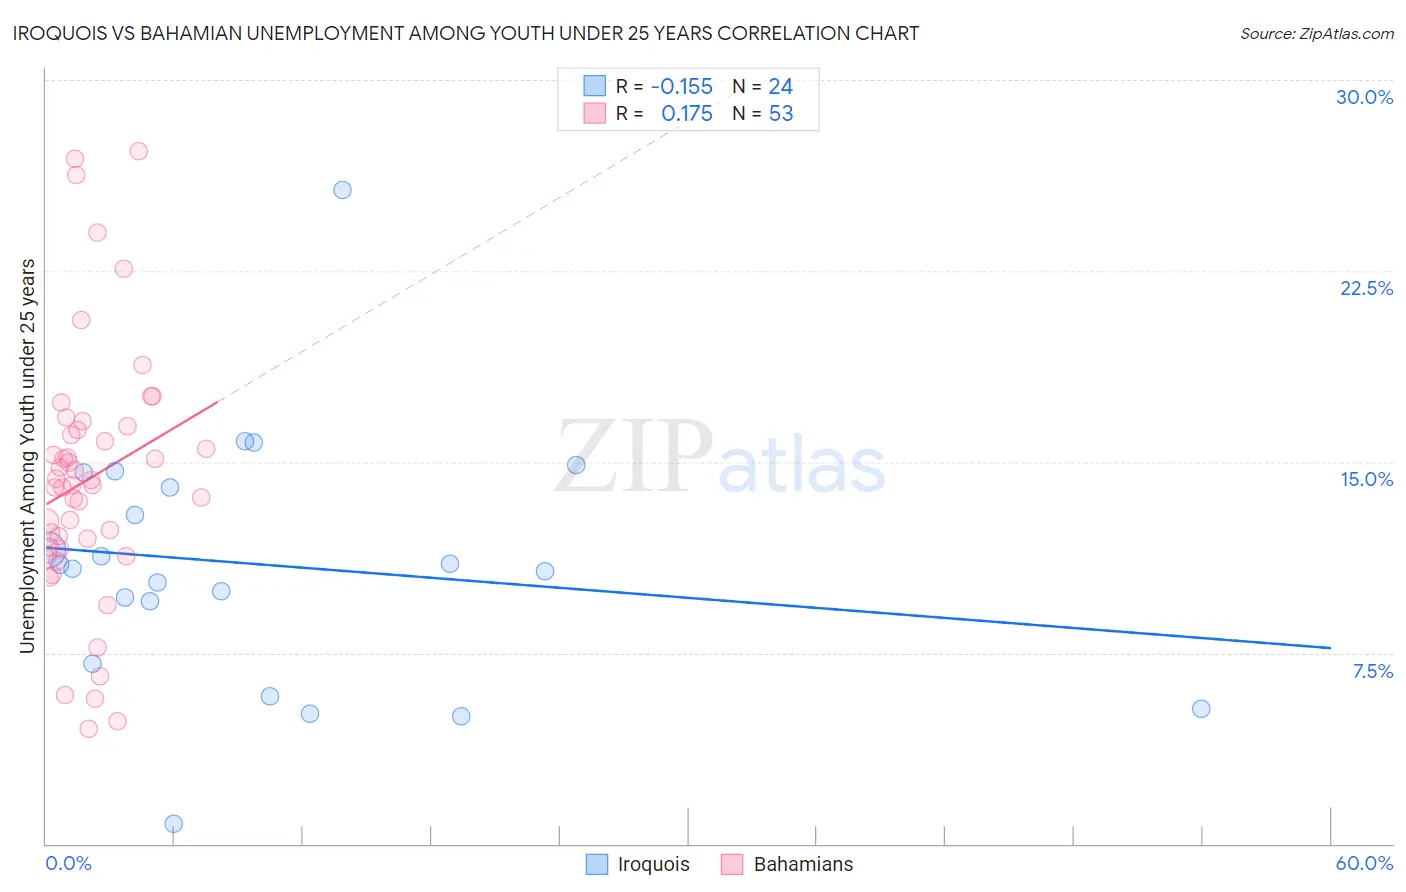 Iroquois vs Bahamian Unemployment Among Youth under 25 years